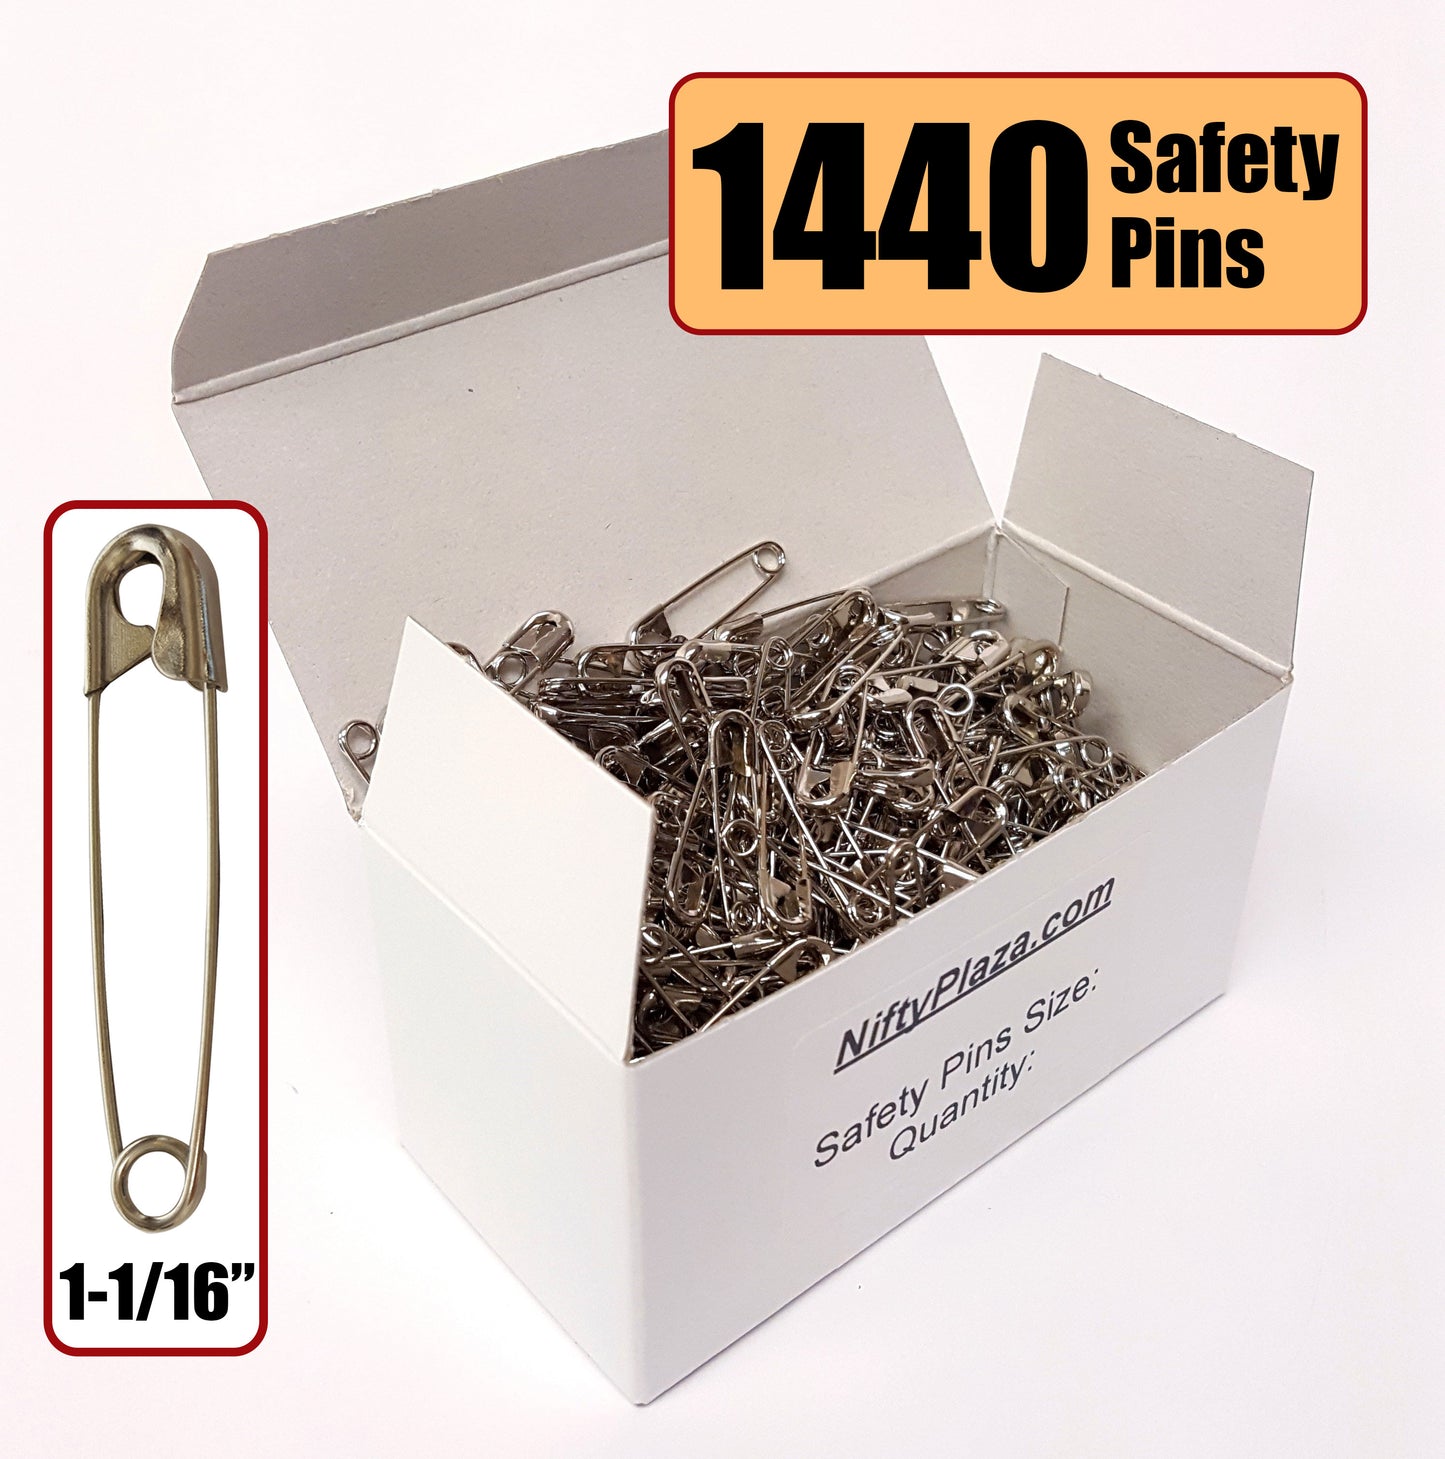 NiftyPlaza Safety Pins, Size 1-1/16 Inch, High Grade Steel, Closed Position, Nickel Pleated